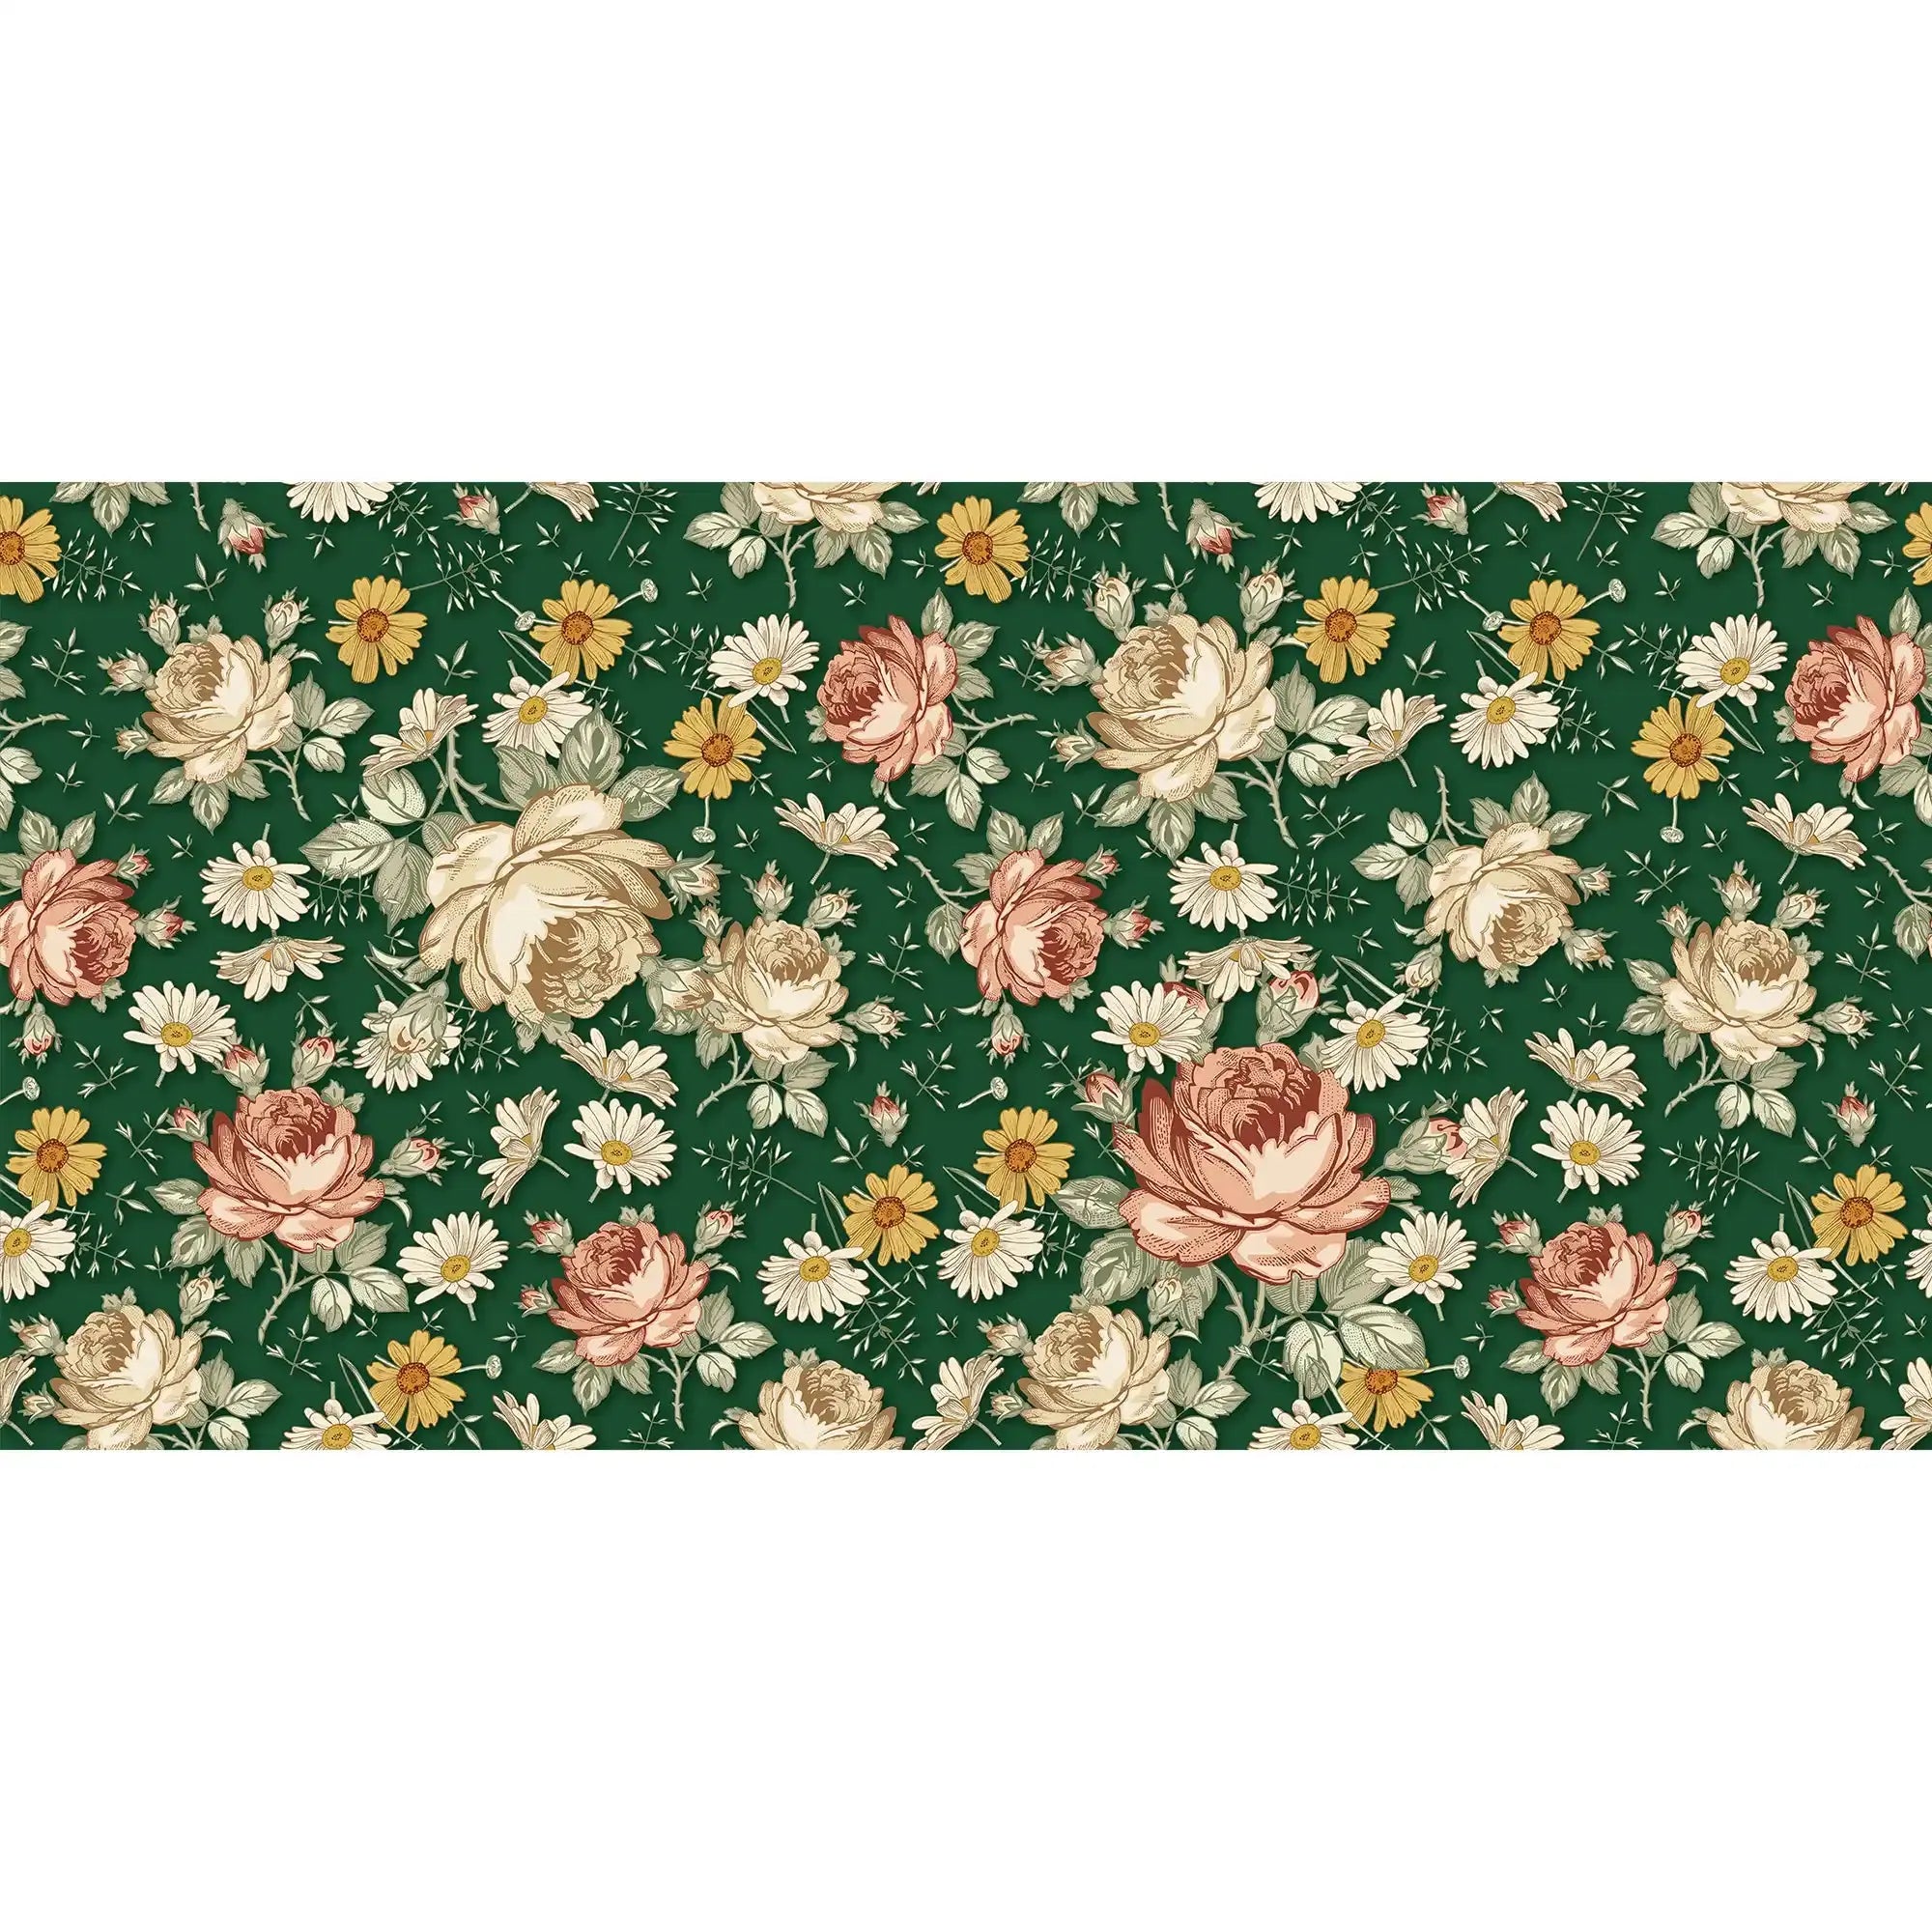 3097-D / Removable Wallpaper Peel and Stick, Floral & Geometric Pattern Wallpaper with Daisies for Room Decor - Artevella